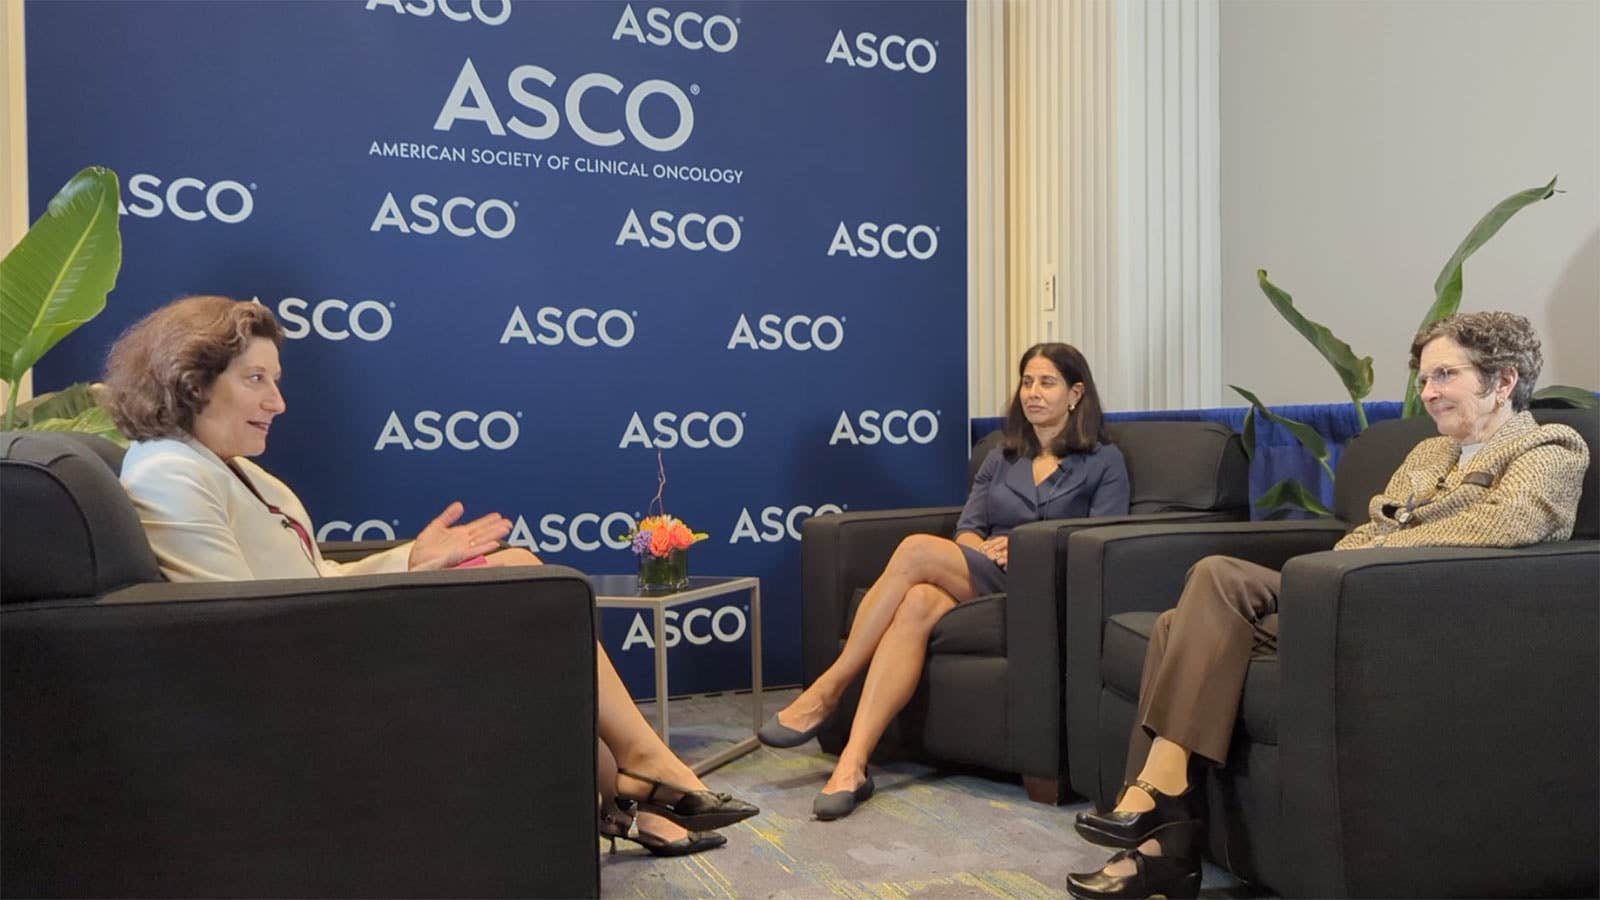 Treating Advanced Breast Cancer After Progression on CDK4/6 Inhibitors [Video]